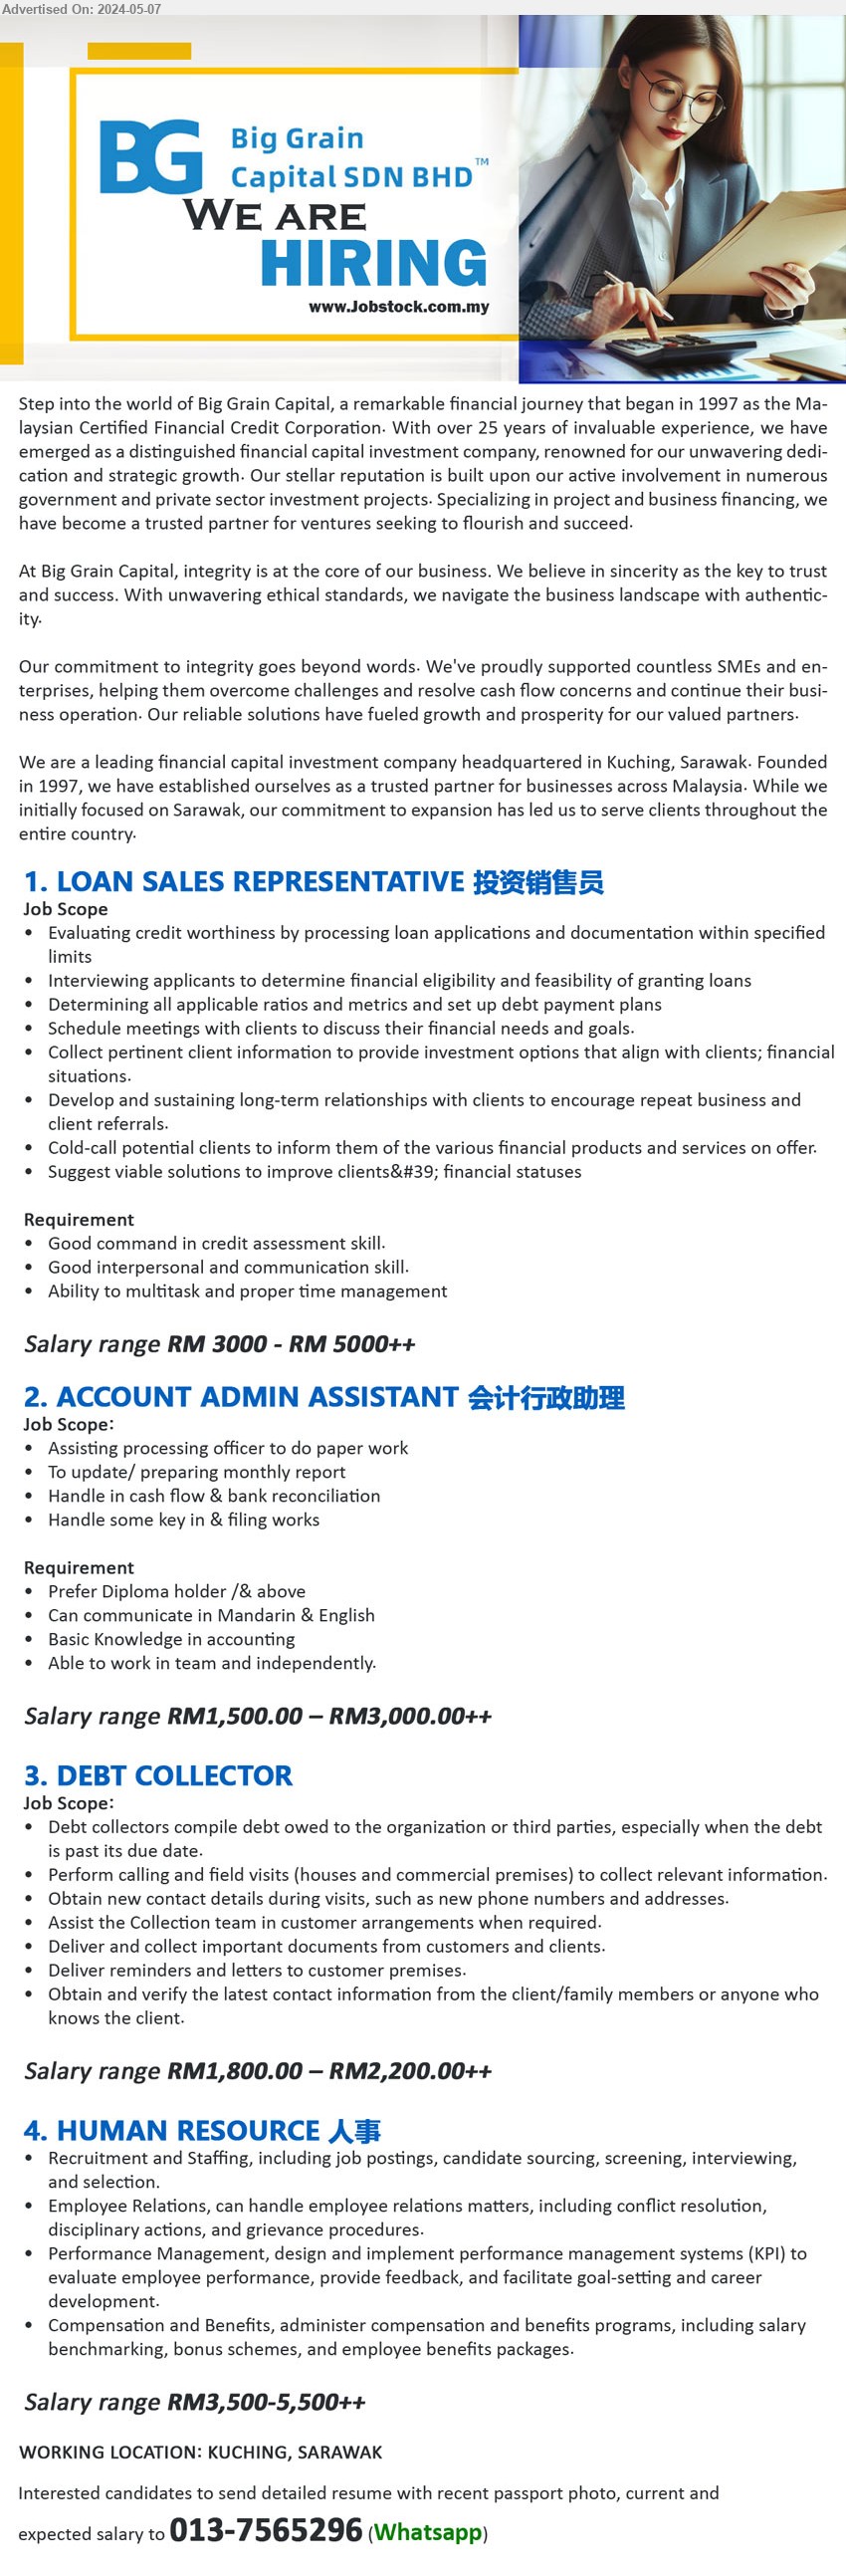 BIG GRAIN CAPITAL SDN BHD - 1. LOAN SALES REPRESENTATIVE 投资销售员 (Kuching), RM 3000 - RM 5000++, Good command in credit assessment skill.,...
2. ACCOUNT ADMIN ASSISTANT 会计行政助理 (Kuching), RM1,500.00 – RM3,000.00++, Prefer Diploma holder /& above, Basic Knowledge in accounting,...
3. DEBT COLLECTOR (Kuching), RM1,800.00 – RM2,200.00++, Debt collectors compile debt owed to the organization or third parties, especially when the debt is past its due date.,...
4. HUMAN RESOURCE 人事 (Kuching), RM3,500-5,500++, Recruitment and Staffing, including job postings, candidate sourcing, screening, interviewing, and selection,...
Whatsapp to : 013-7565296